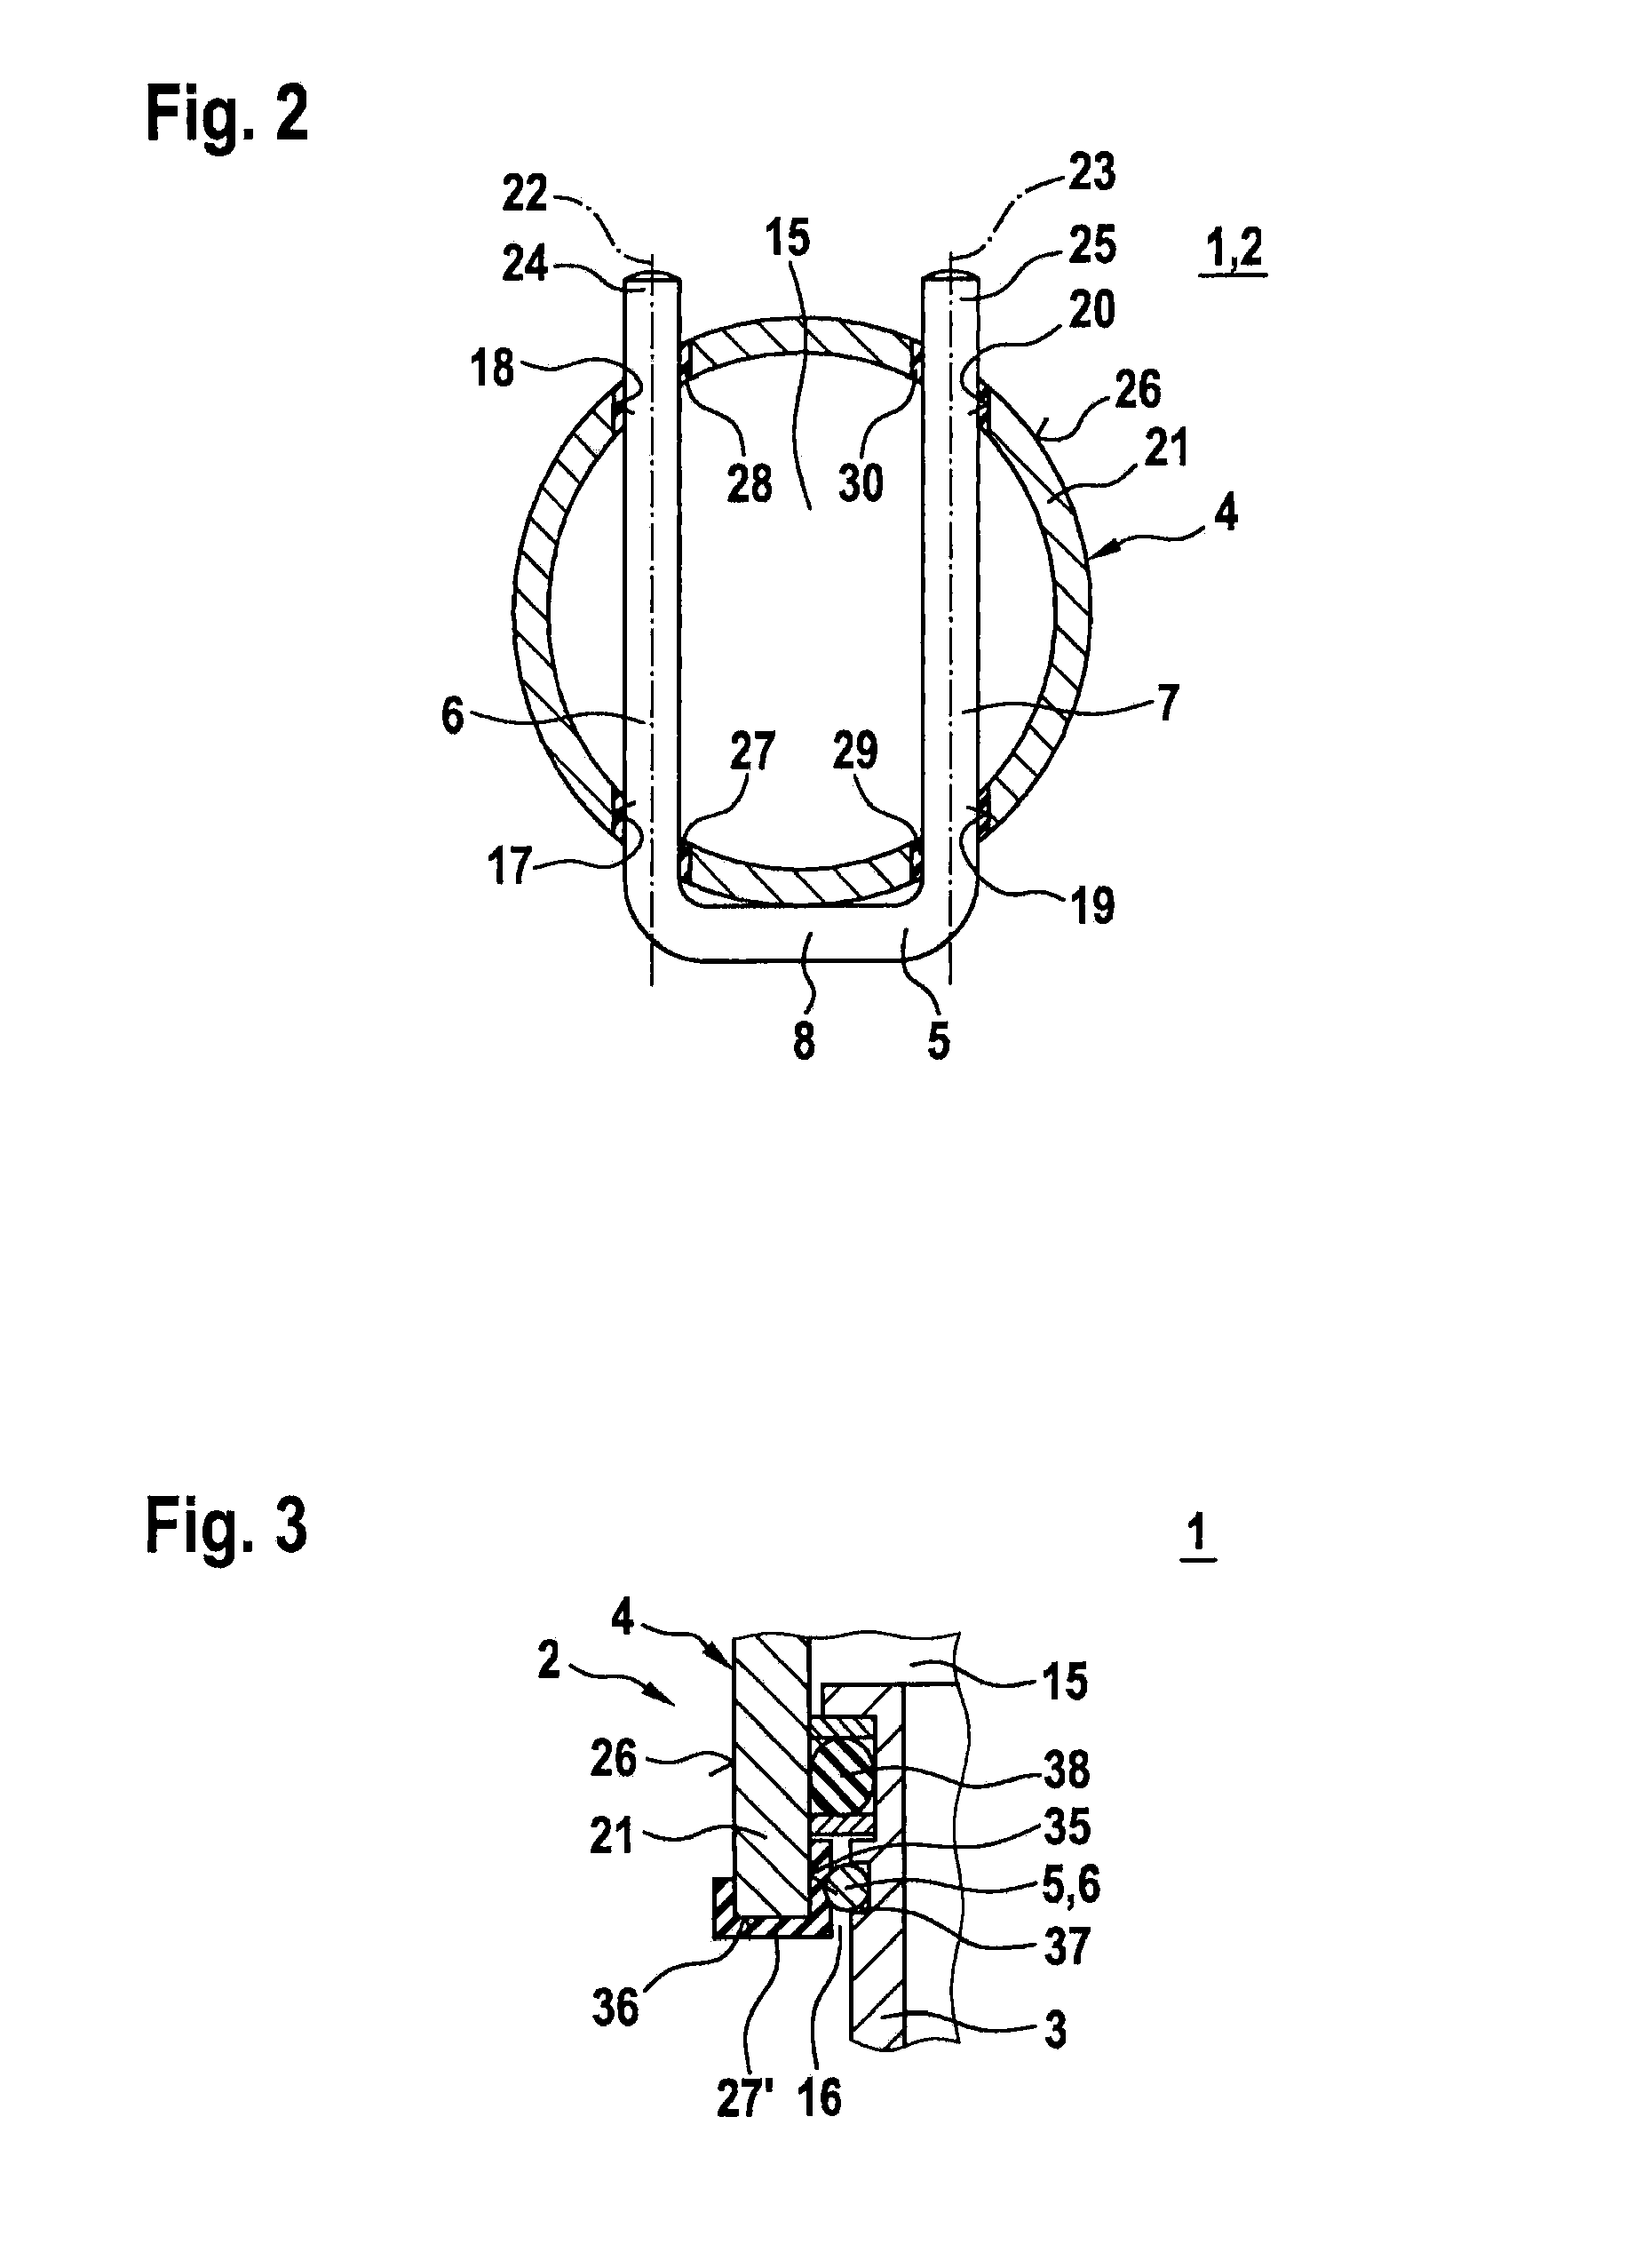 Fuel injection system having a fuel-conducting component, a fuel injection valve and a connection element